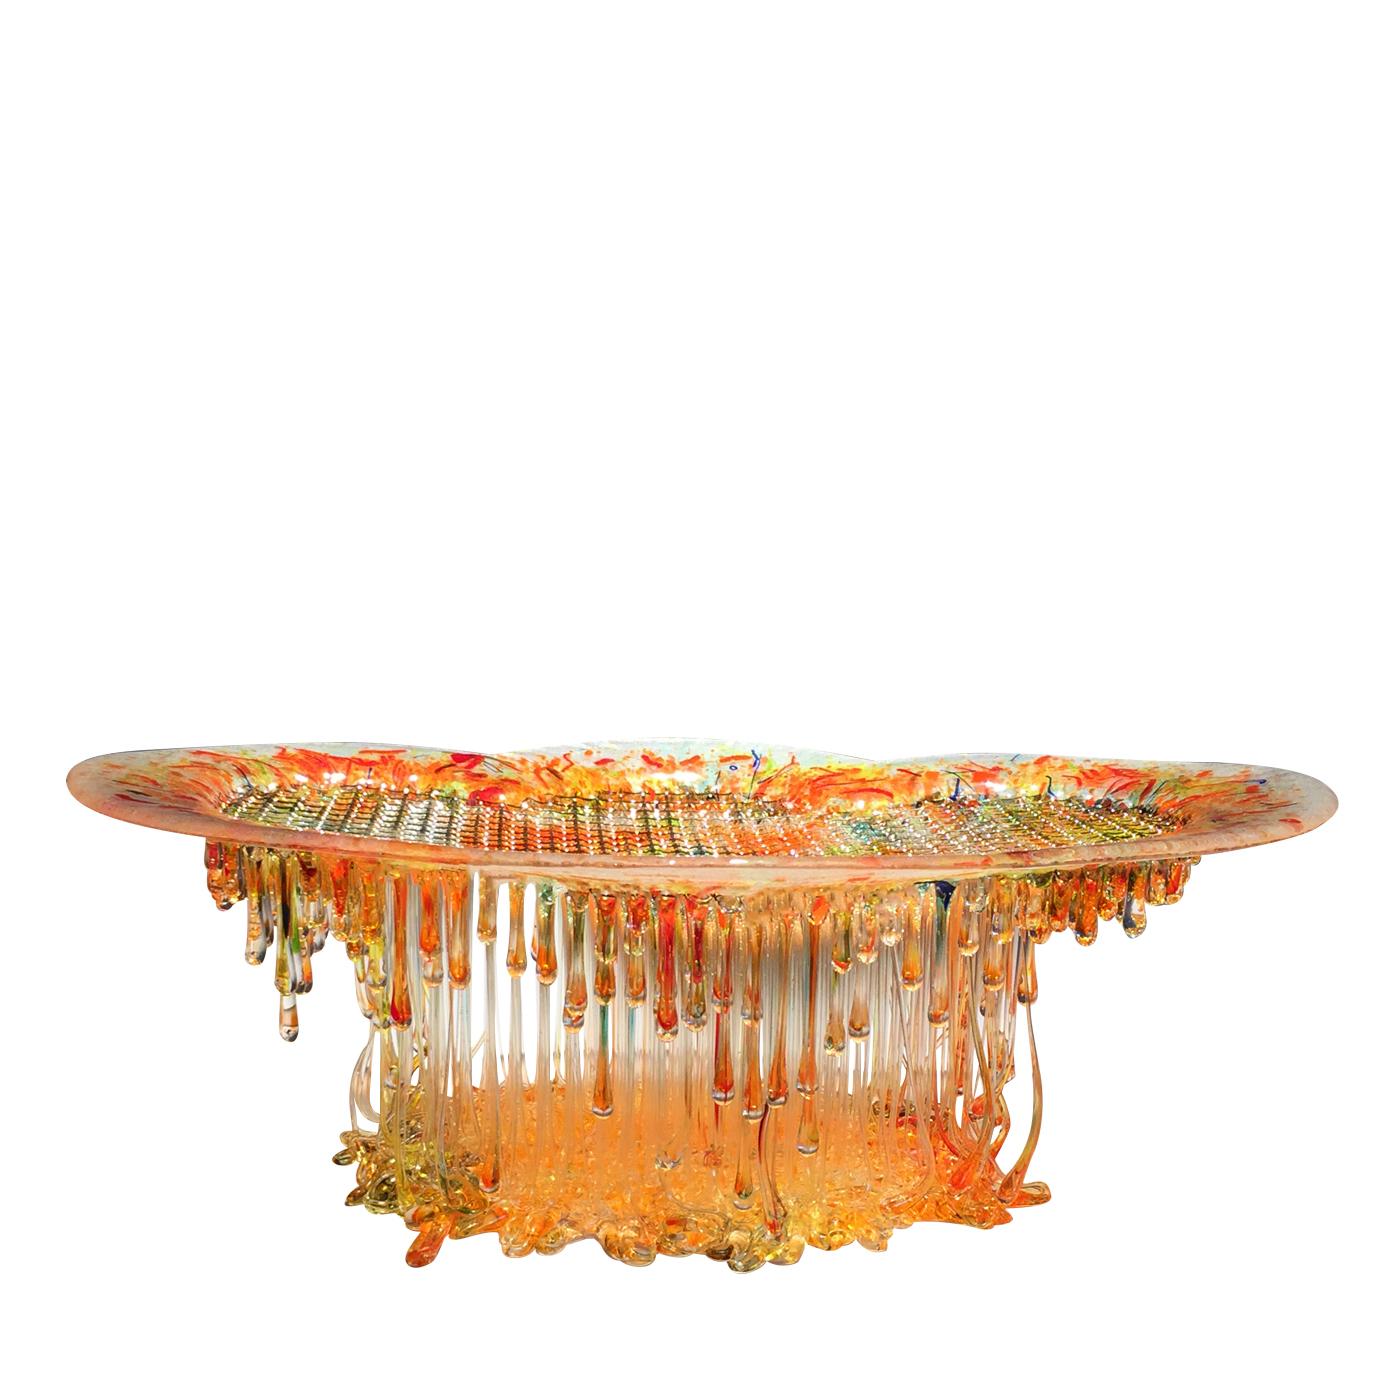 This spectacular and multicolored sculpture is crafted from Murano glass and is a unique piece with its rainbow hues and being reminiscent of a jellyfish its smooth top and multitude of tentacle-shaped forms underneath. Light filters through the top